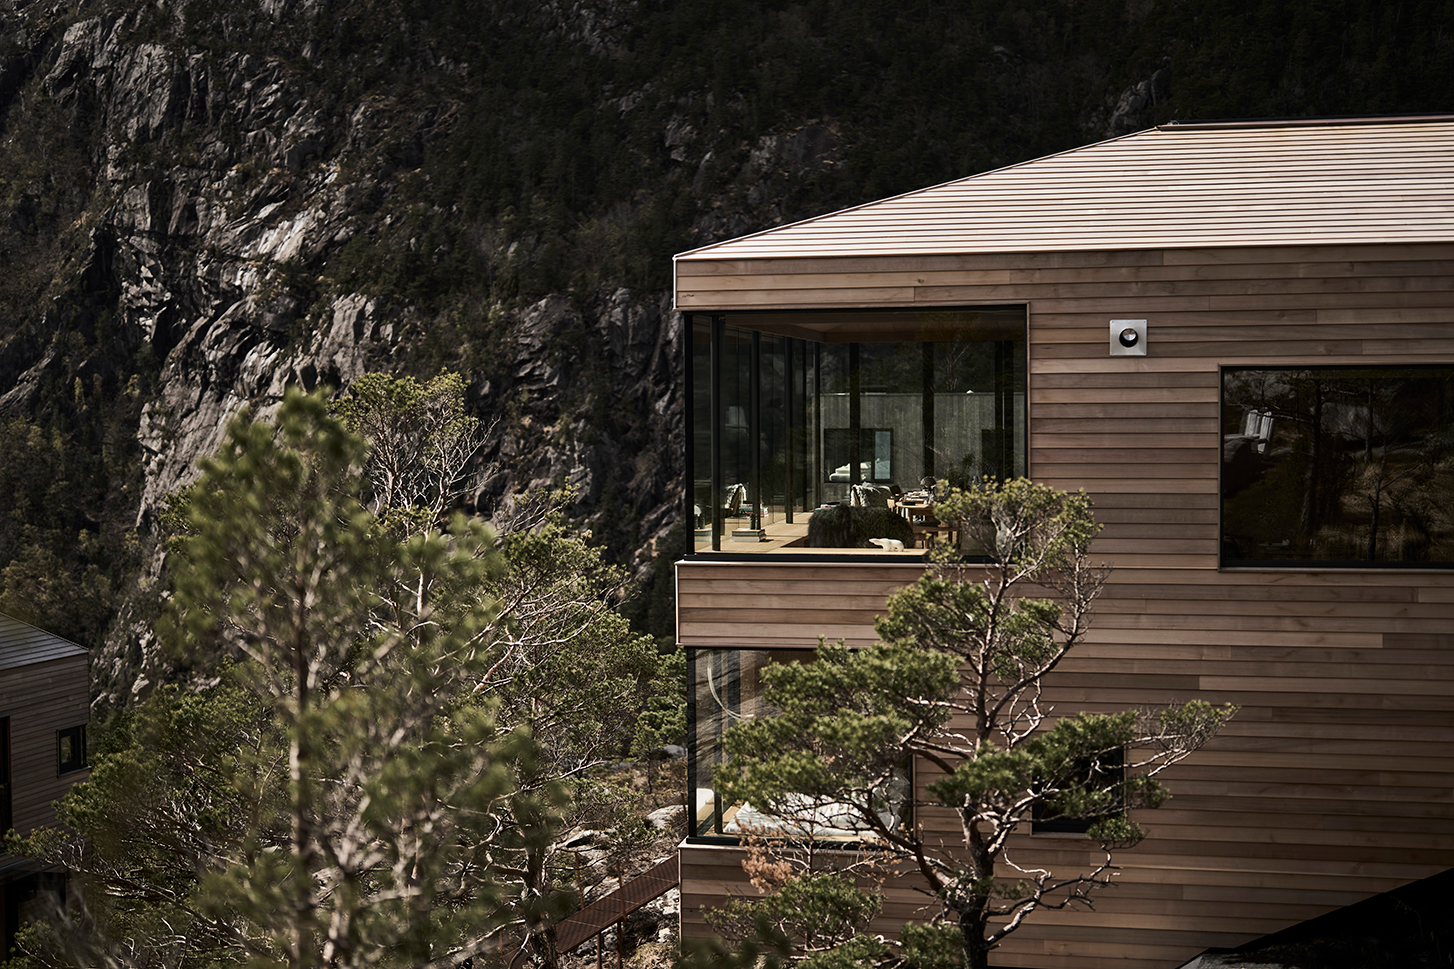 Melting into the surroundings of Lysefjord, these cabins are designed to take it slow.